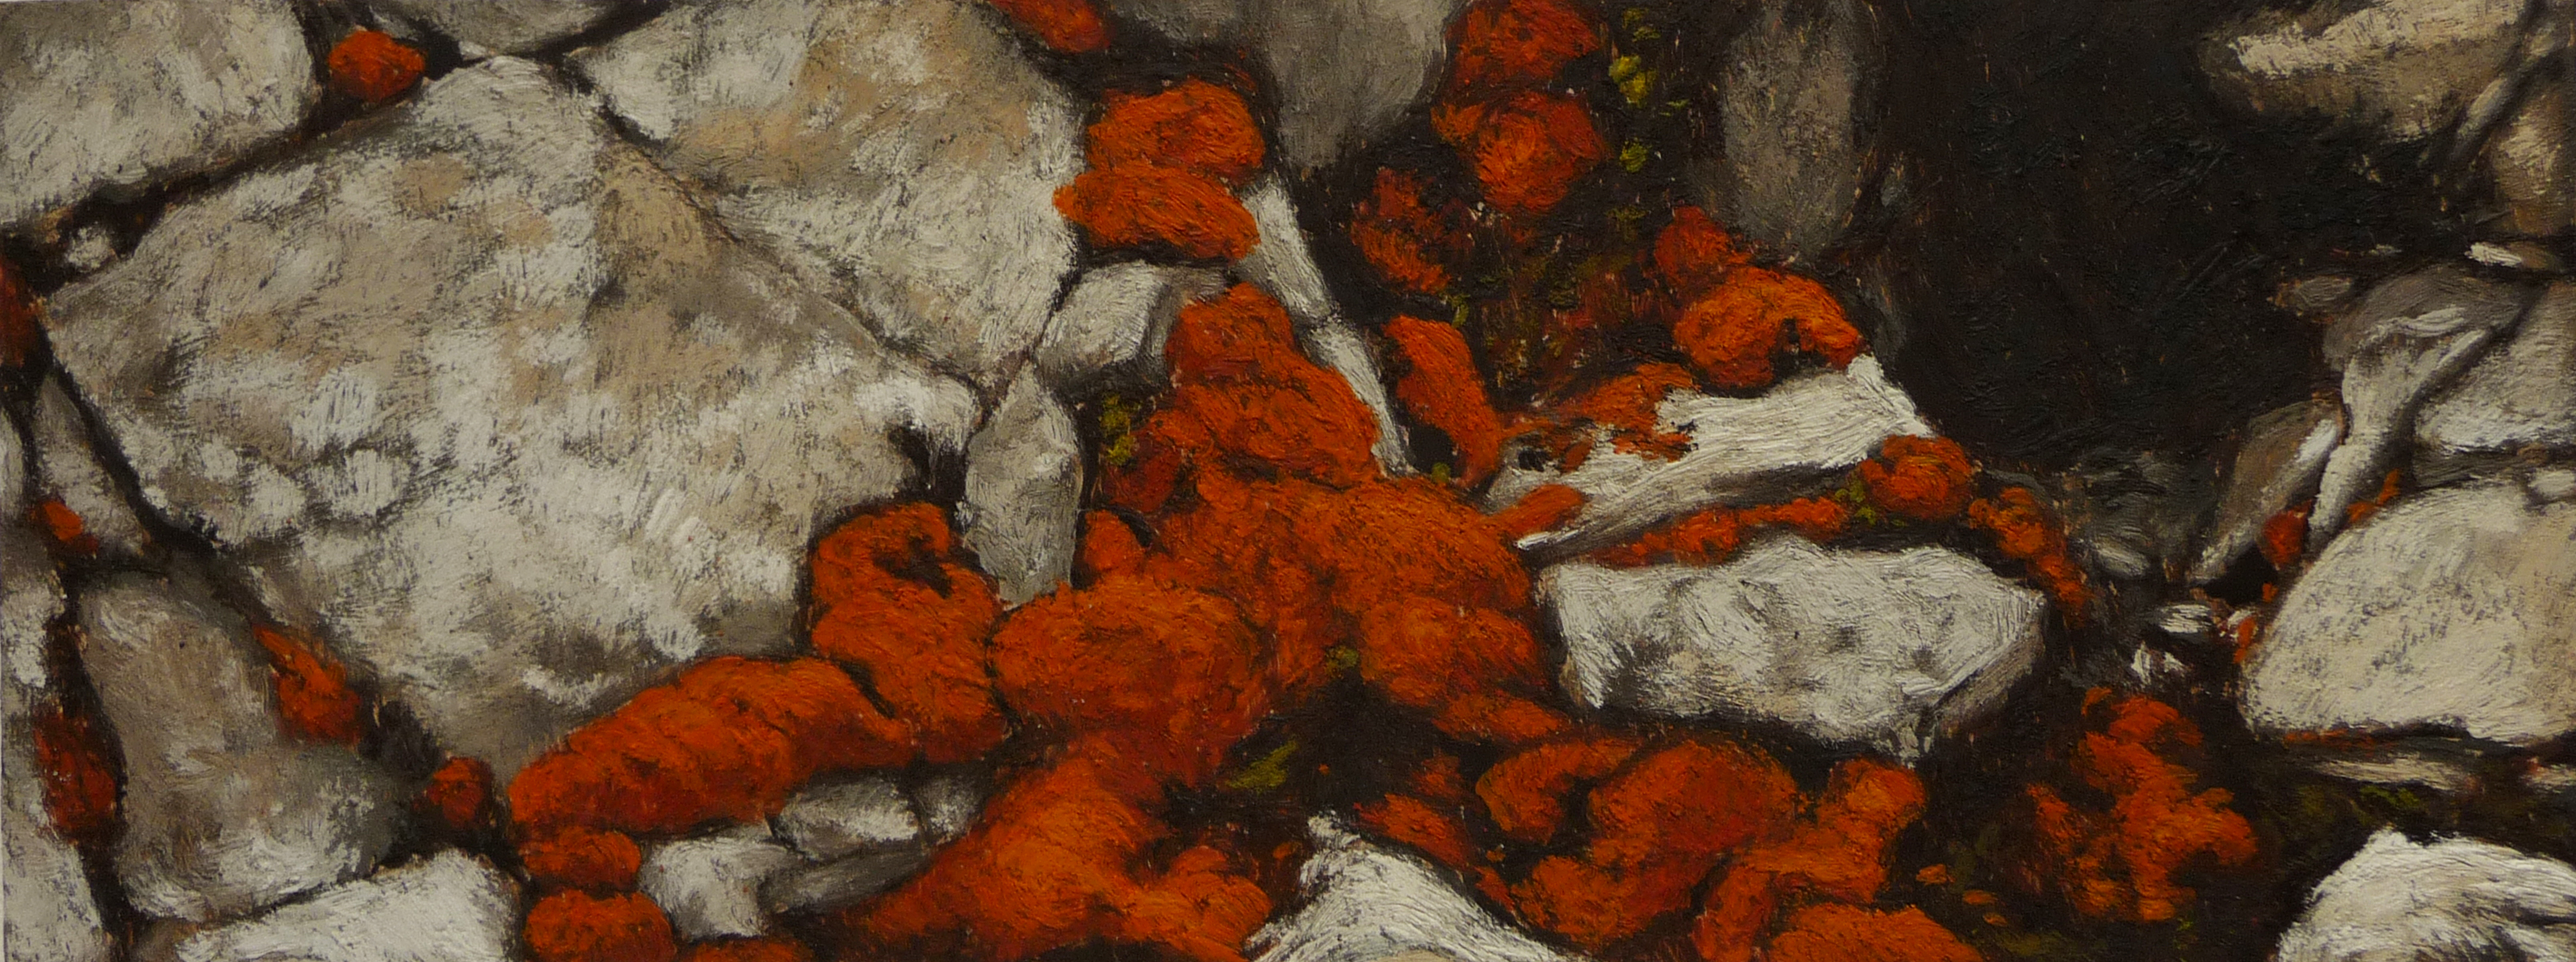 <p><strong>Orange moss            SOLD</strong><br />Encaustic on wood, 34 x 13 cm</p>